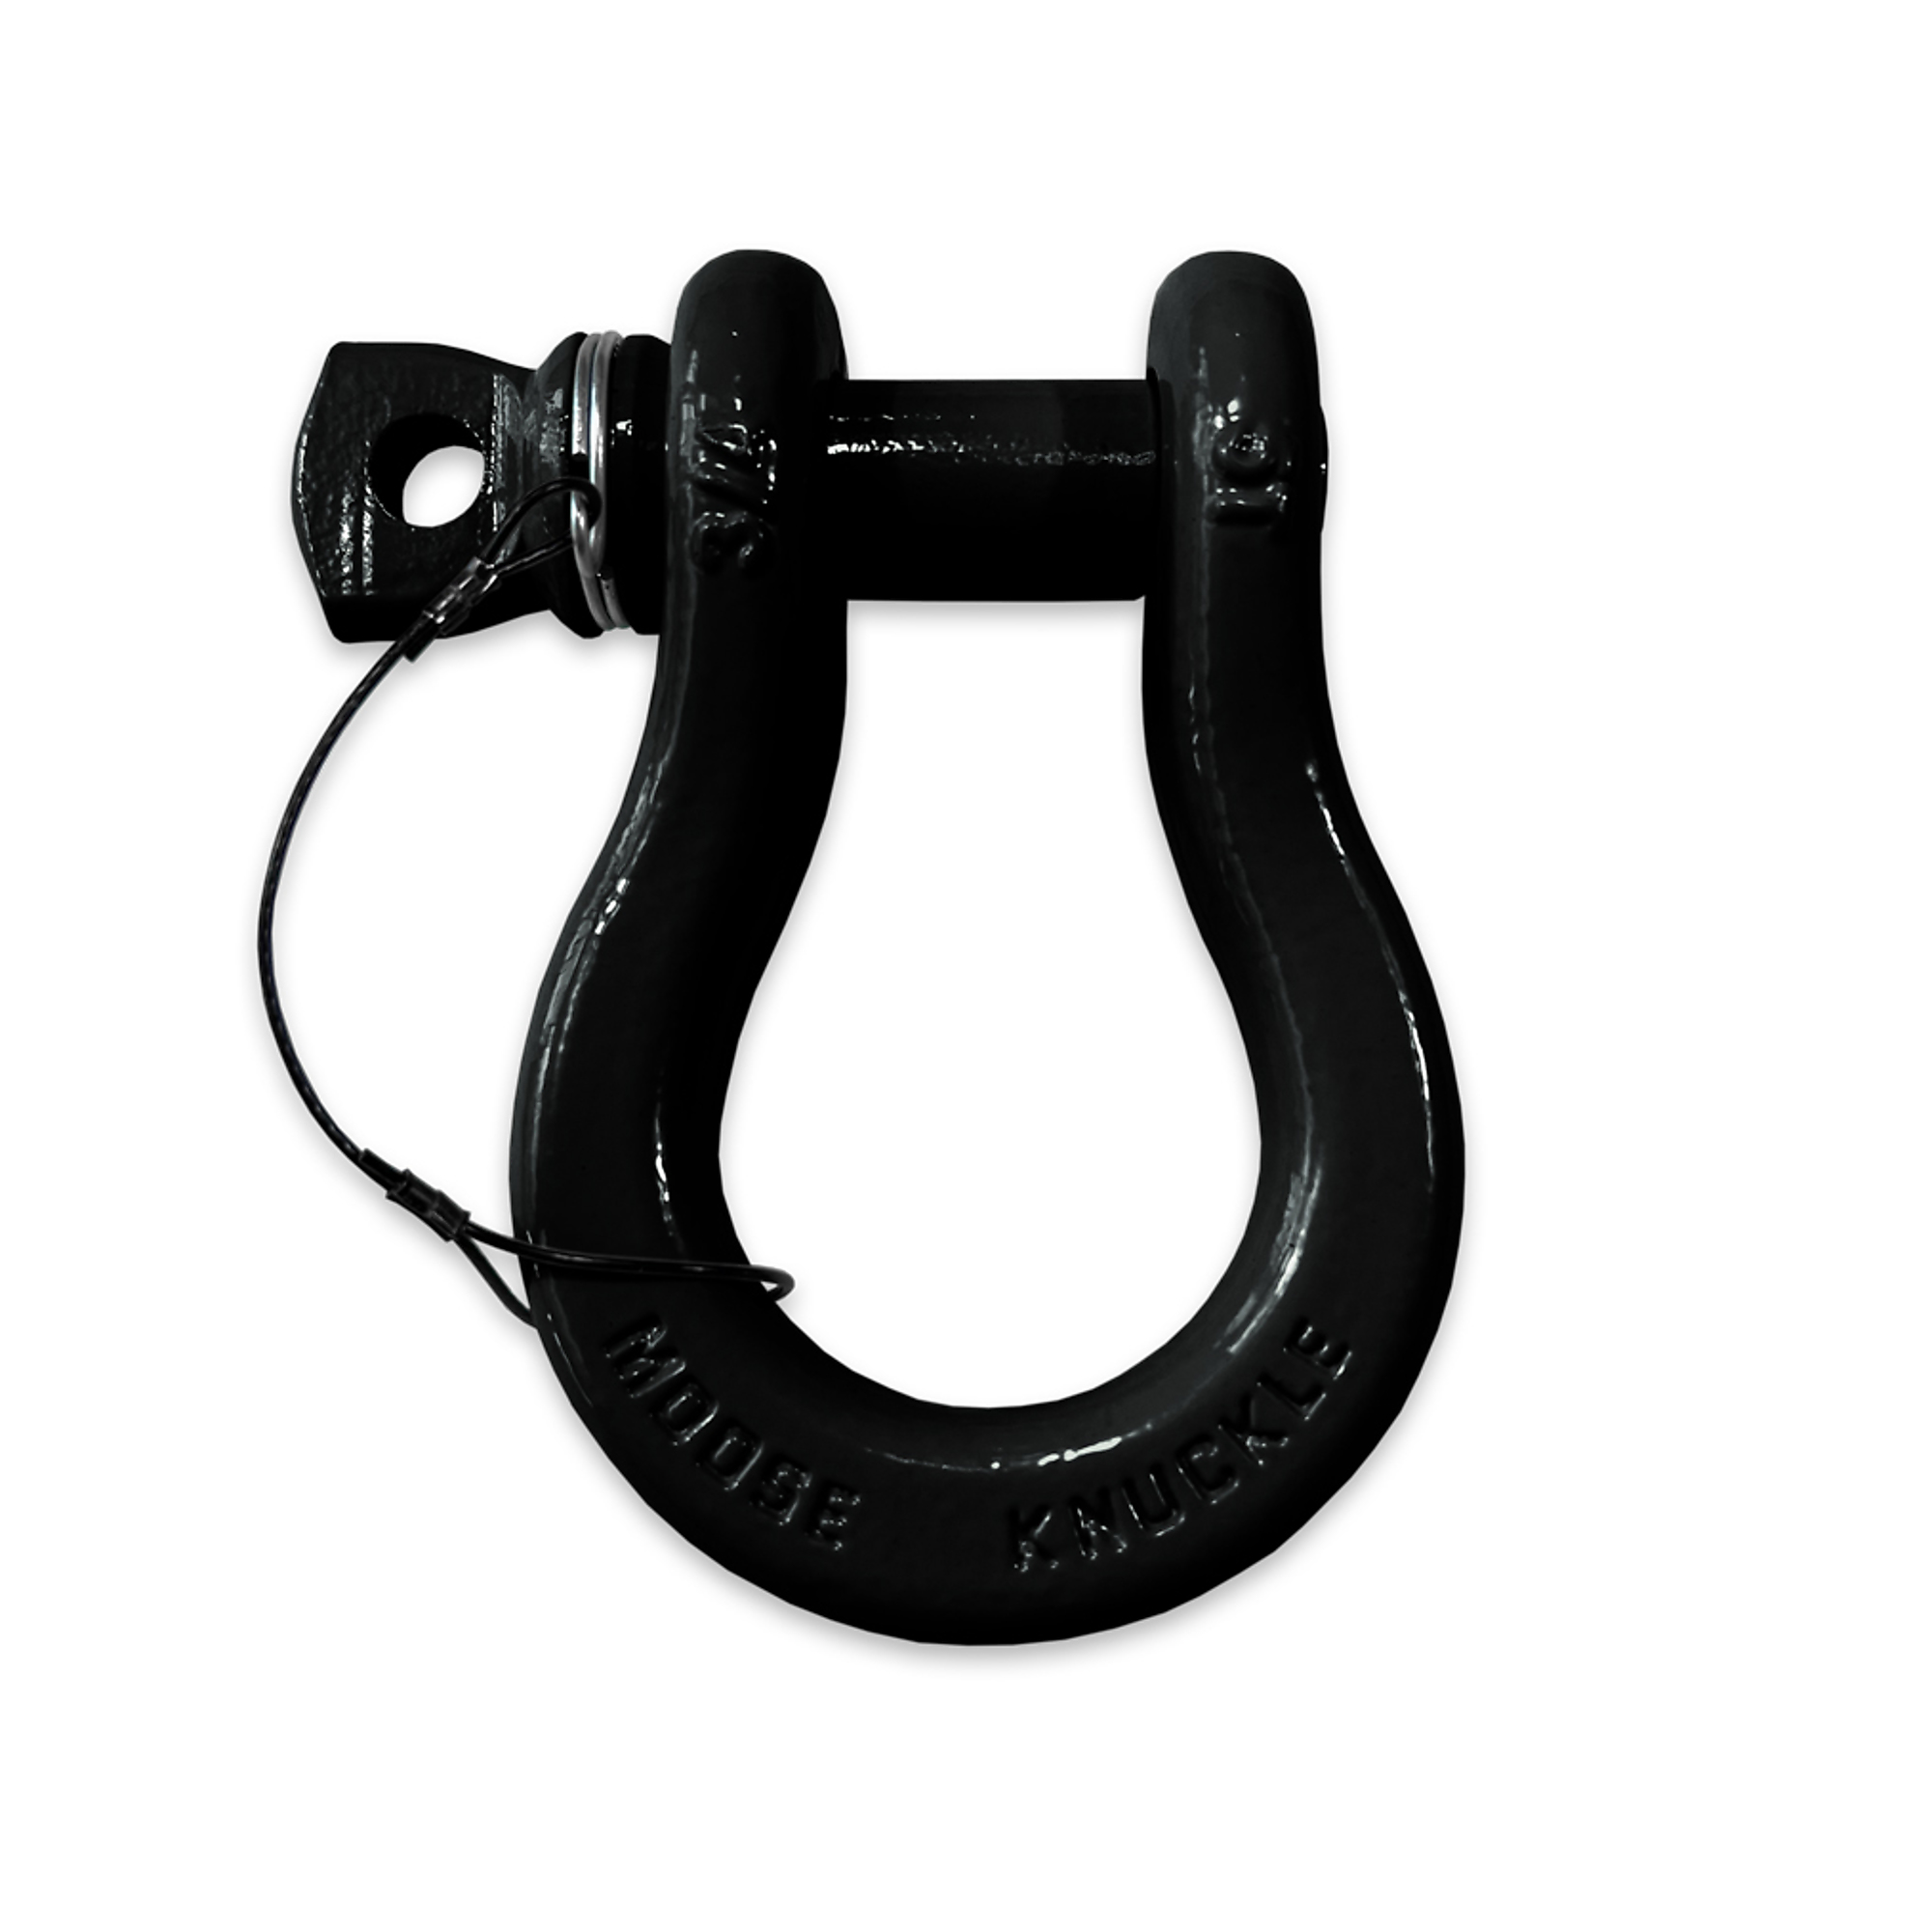 Moose Knuckle Offroad, Black Hole Recovery Tow Lanyard Spin Pin 3/4 Shackle, Working Load Limit 10000 lb, Model FN000023-001